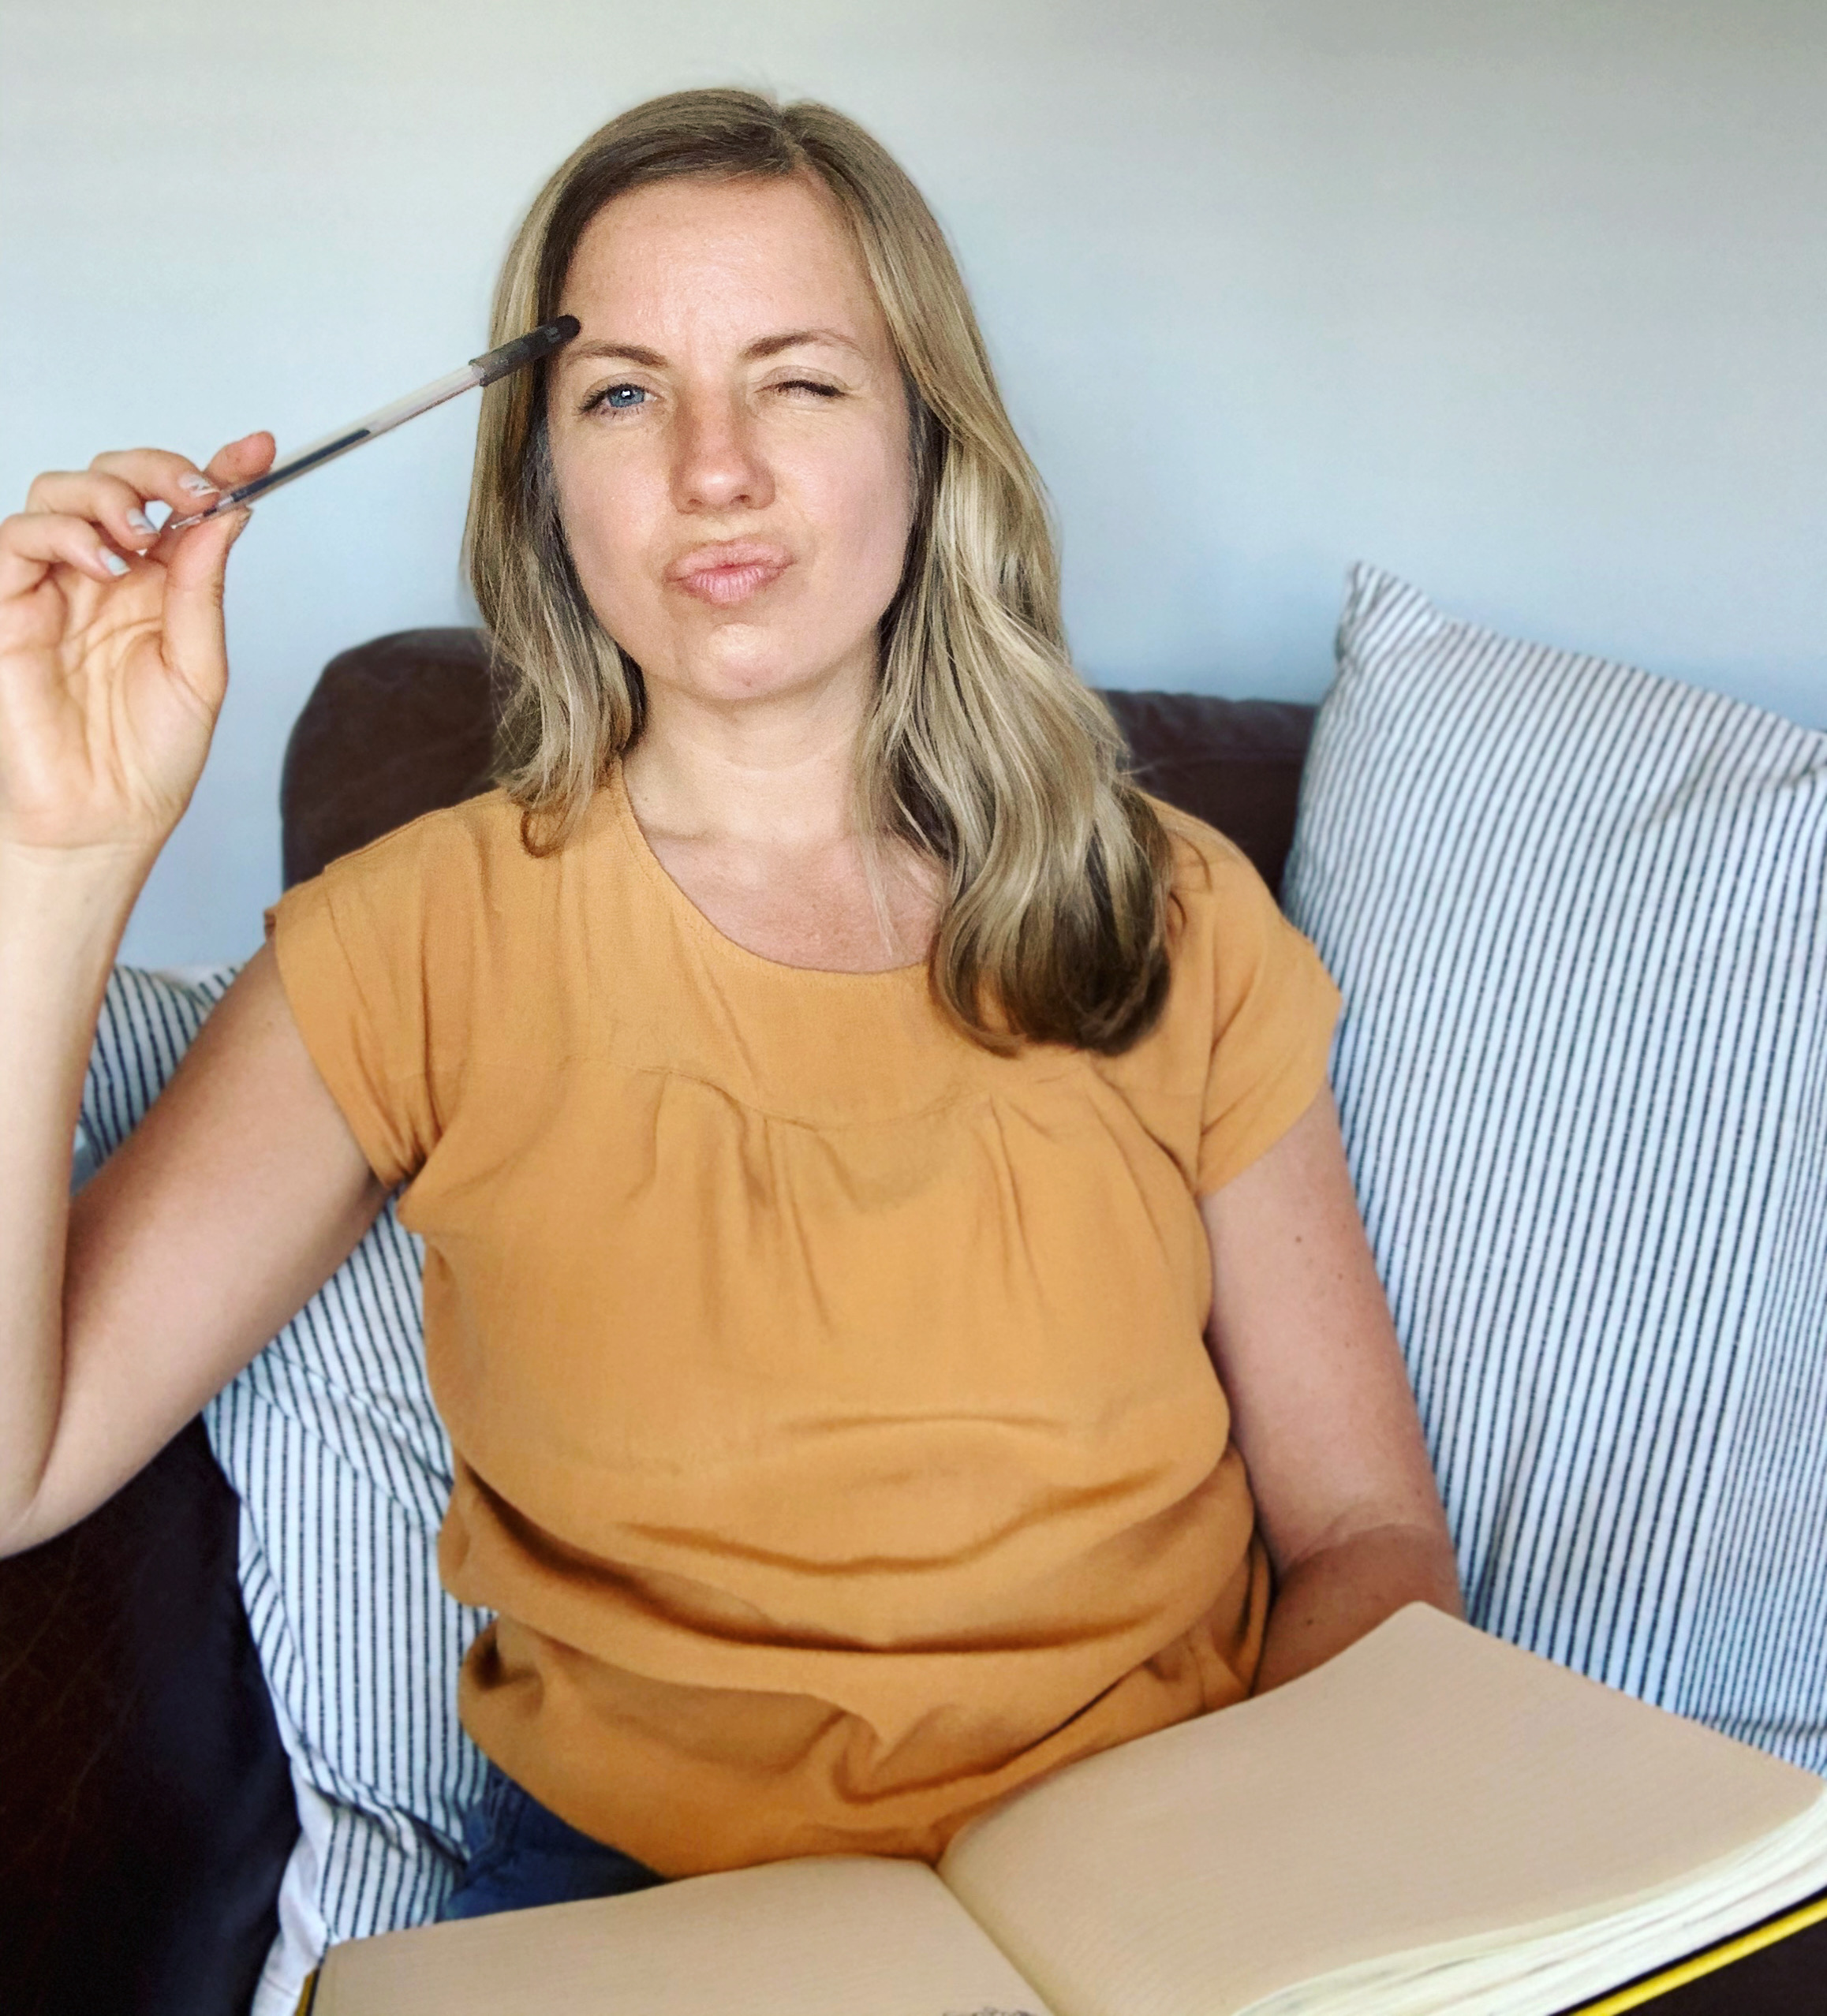 A woman is sat on a sofa, with a notebook in hand. She is resting her closed pen on her temple, looking very confused. She has blonde wavy hair and a short sleeve orange top. She looks overwhelmed with the amount of pricing options there are!